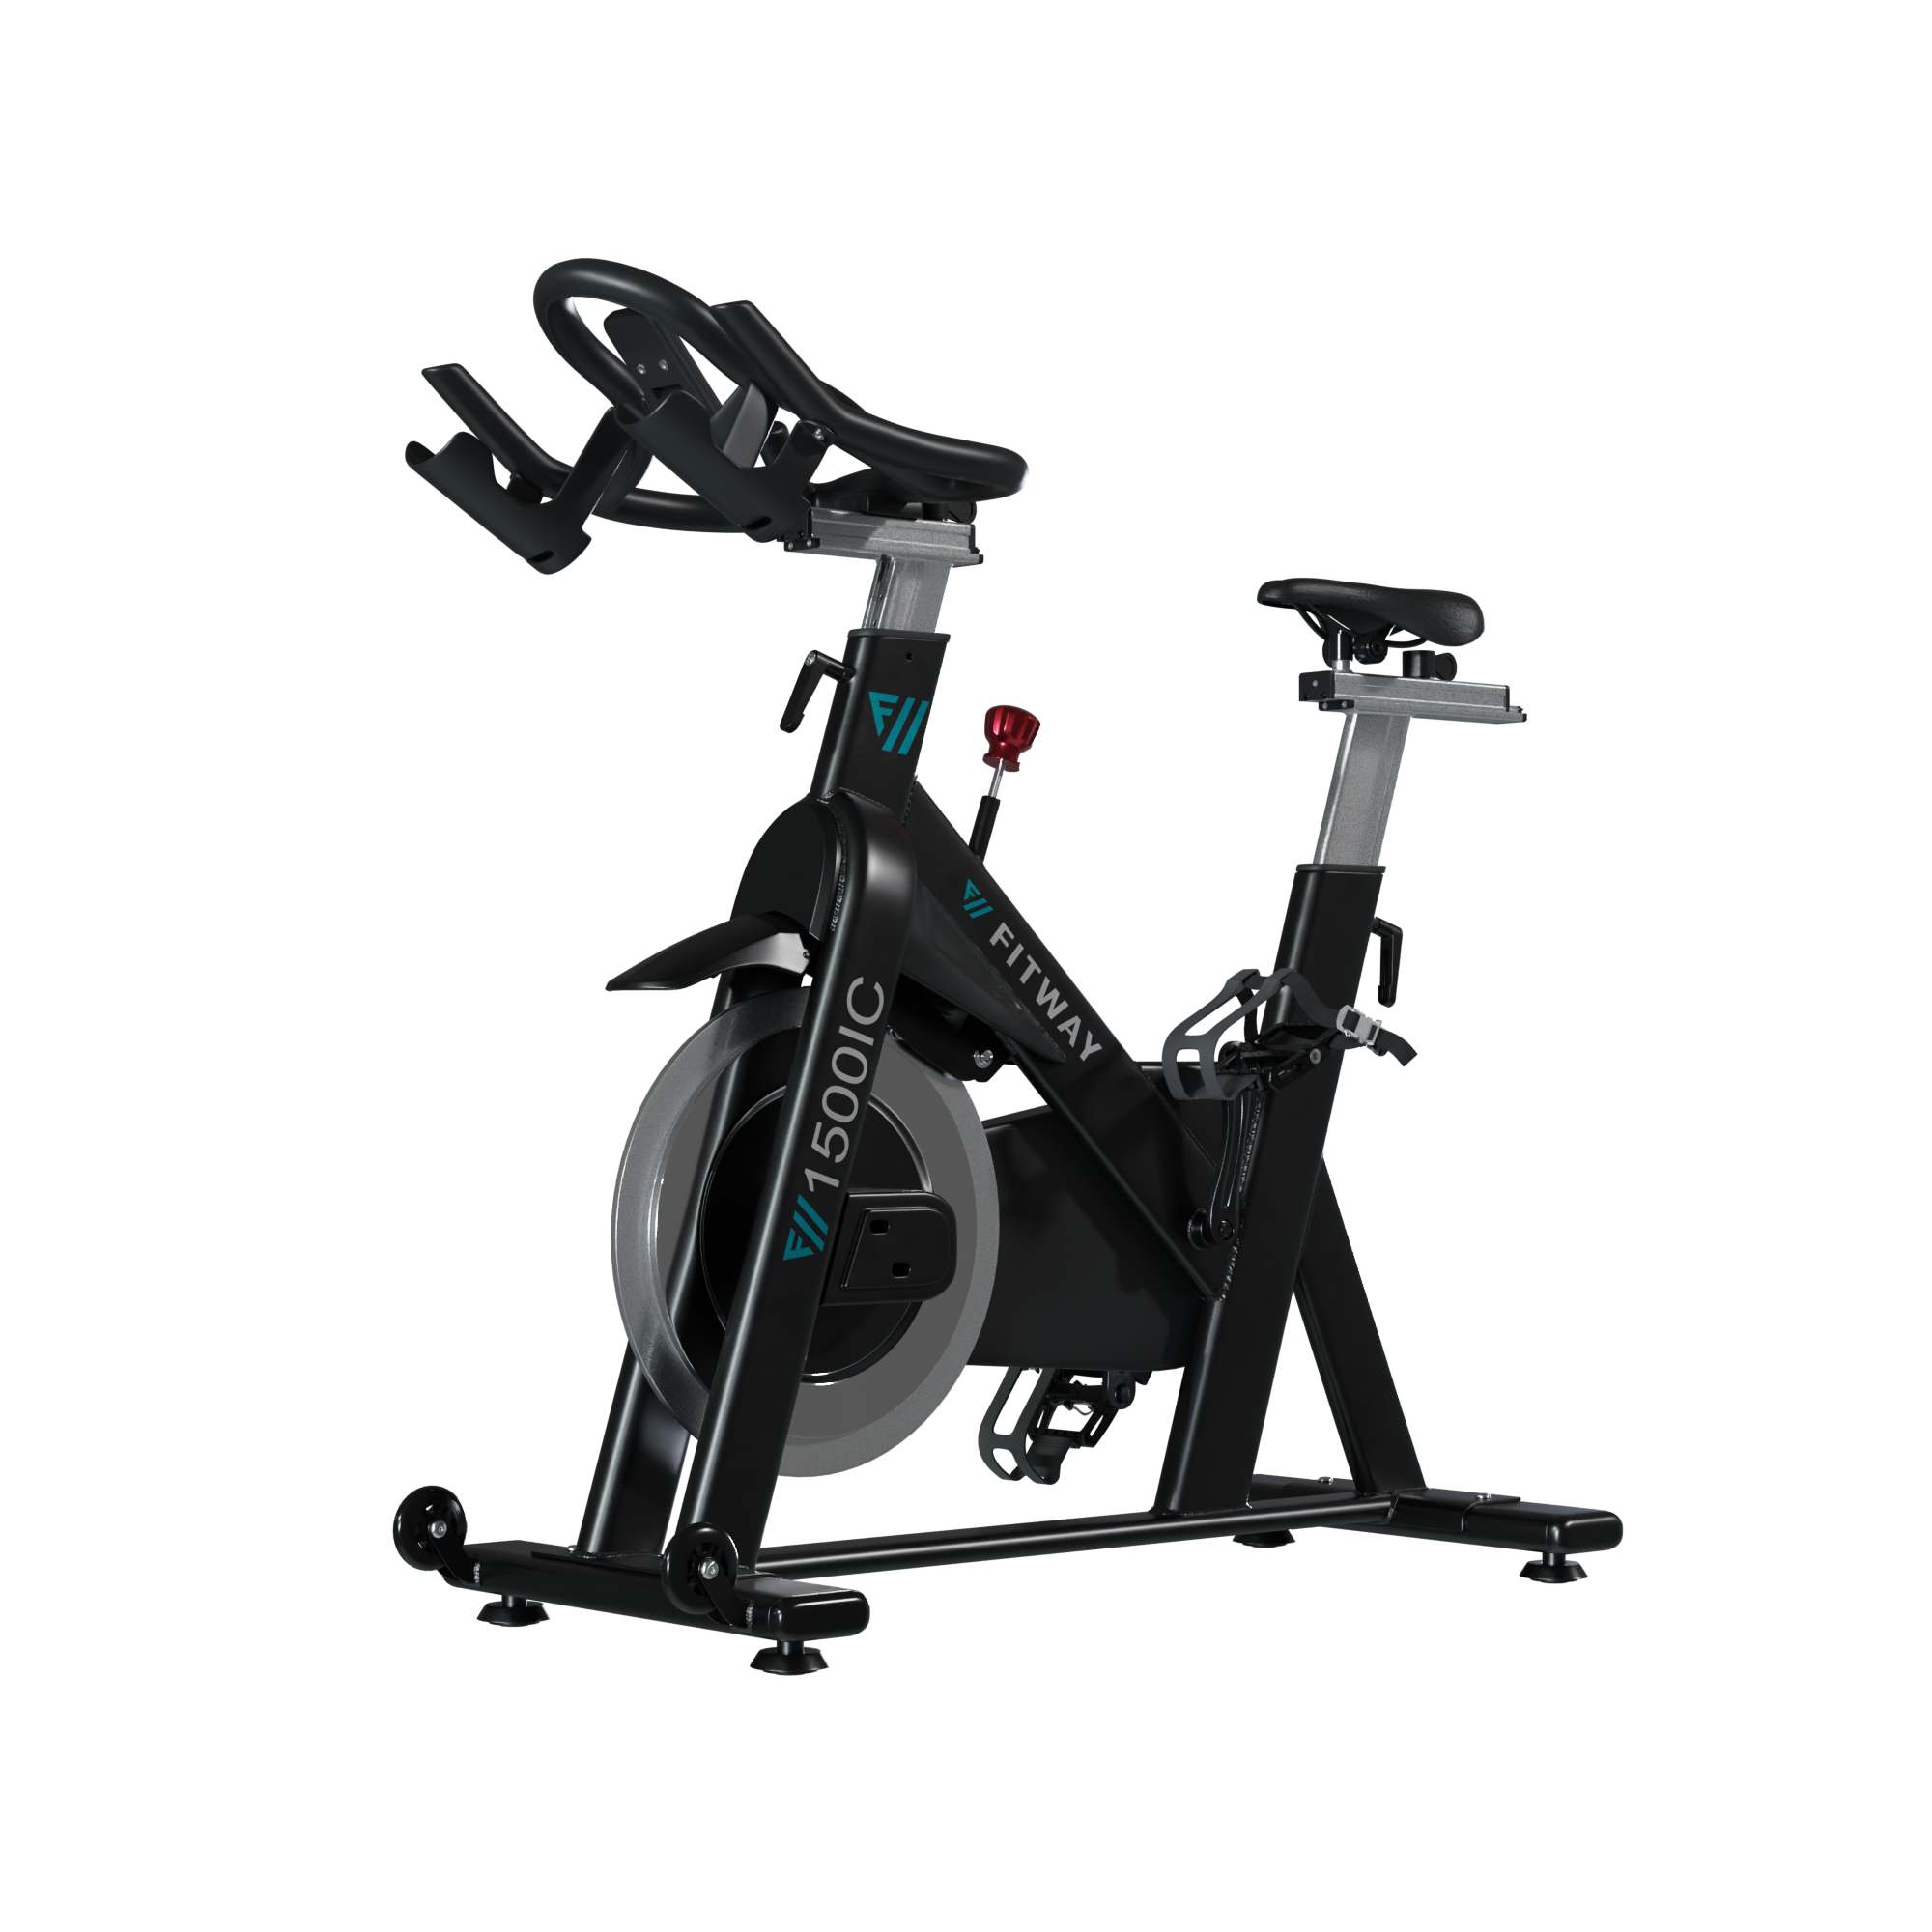 Calgarys best selection of premium indoor cycles and spin bikes. From basic dedsign all the way to connected bikes like peloton.